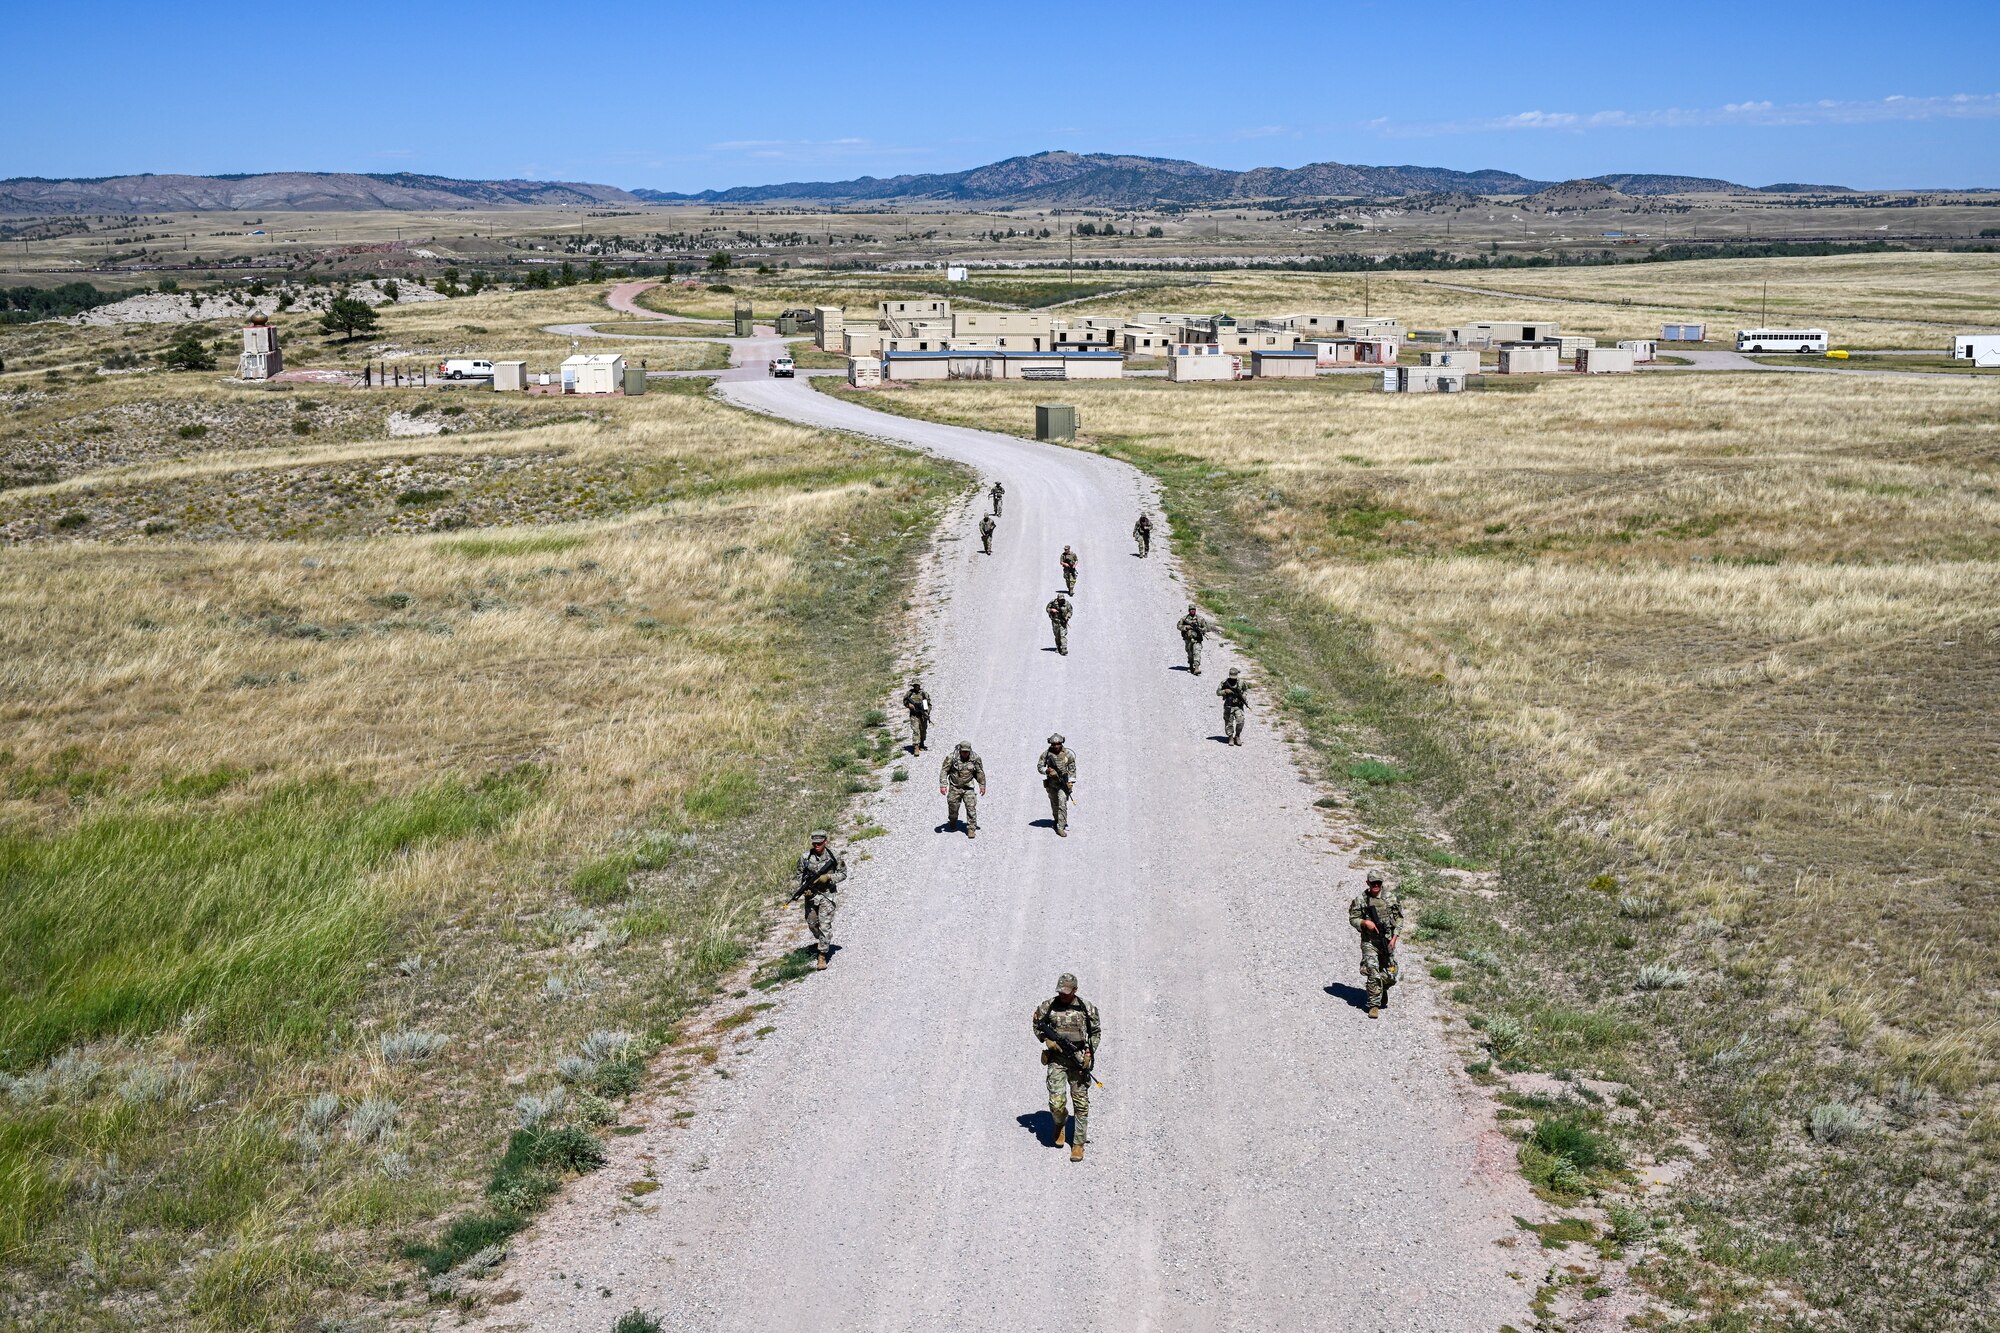 Defenders assigned to the 91st Missile Security Forces Squadron (MSFS) ruck up a hill during Operation Frontier Thunder at Camp Guernsey, Wyoming, Aug. 30, 2023. Operation Frontier Thunder was a deployment readiness exercise designed to test 91st MSFS defender’s expeditionary skills. (U.S. Air Force photo by Airman 1st Class Kyle Wilson)